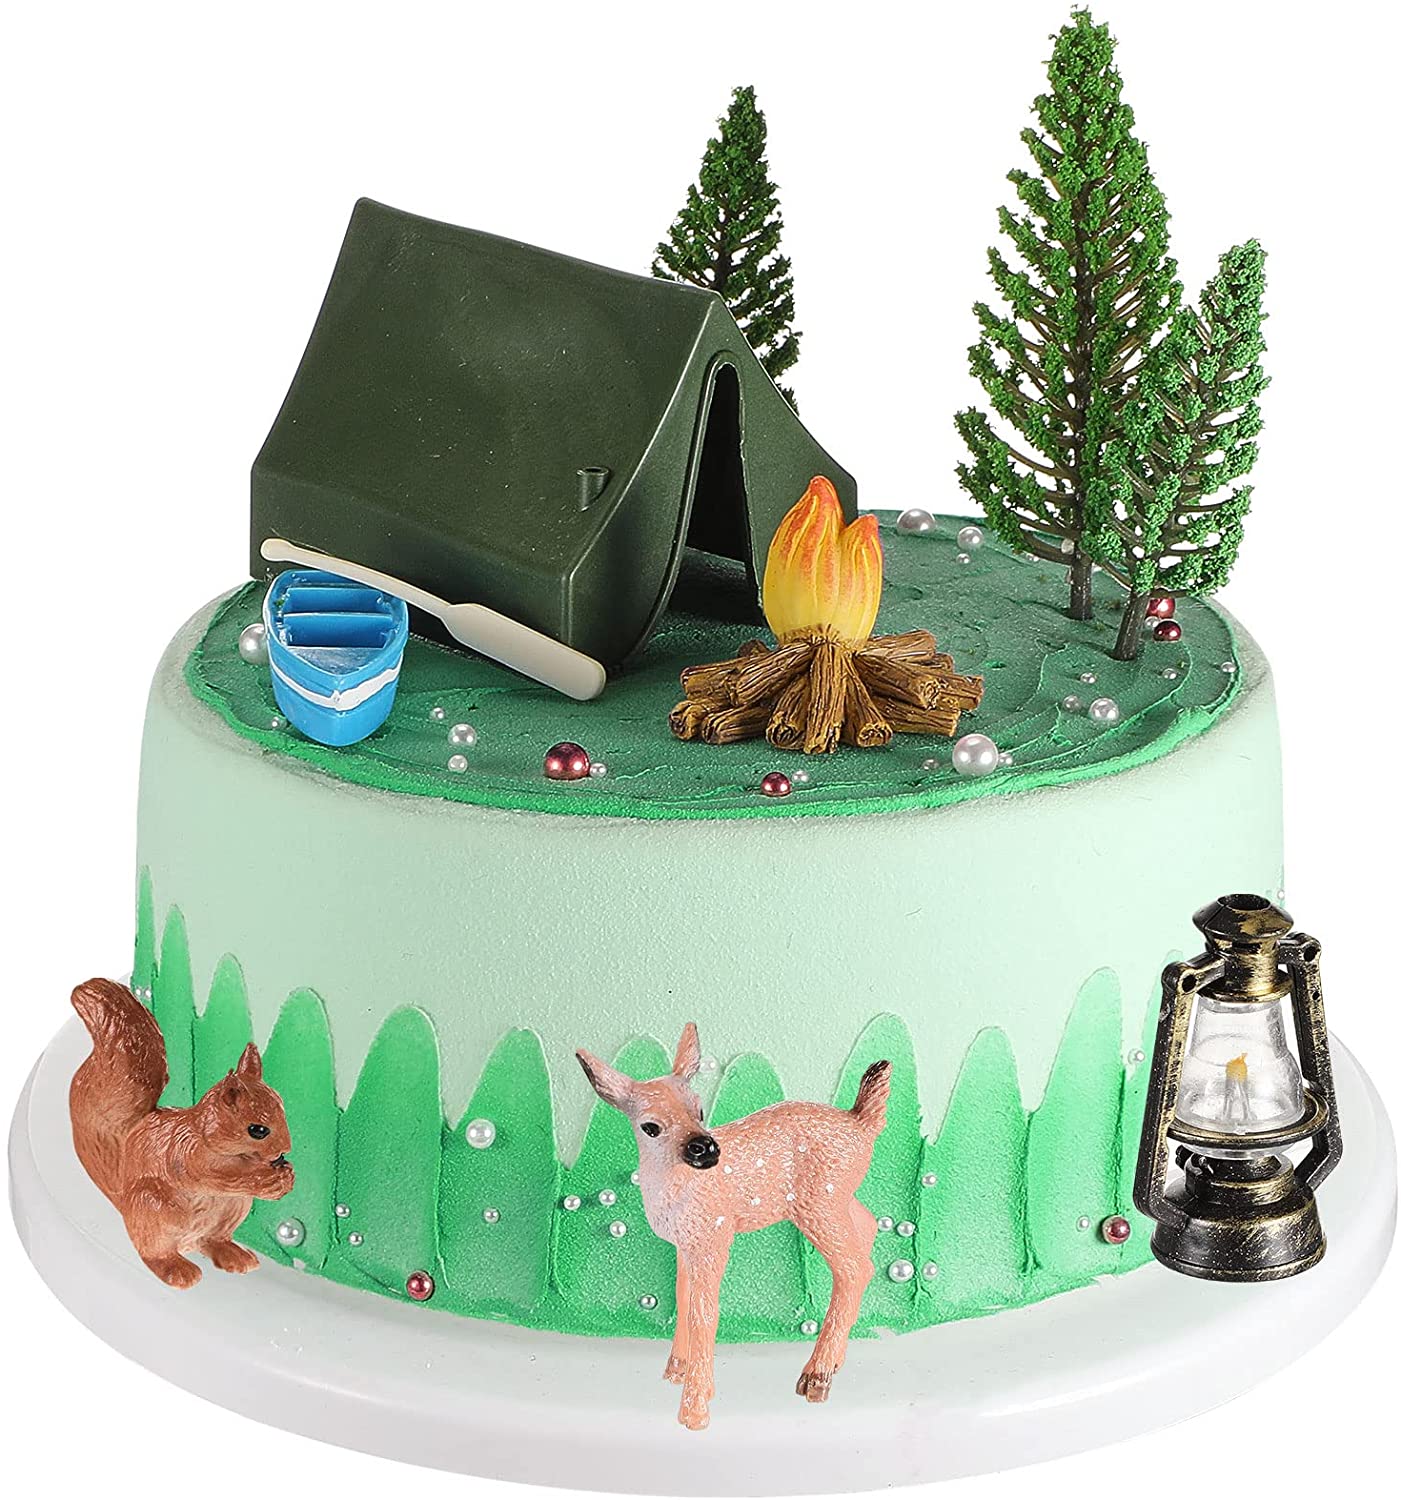 Lukinuo 13pcs Camping Cake Topper Fireside Camp DecoSet Tent Bonfire Canoe Tree Squirrel Deer Figures Camping Cake Decoration for Happy Camper Forest Summer Camping Picnic Hiking Adventure Theme Party 